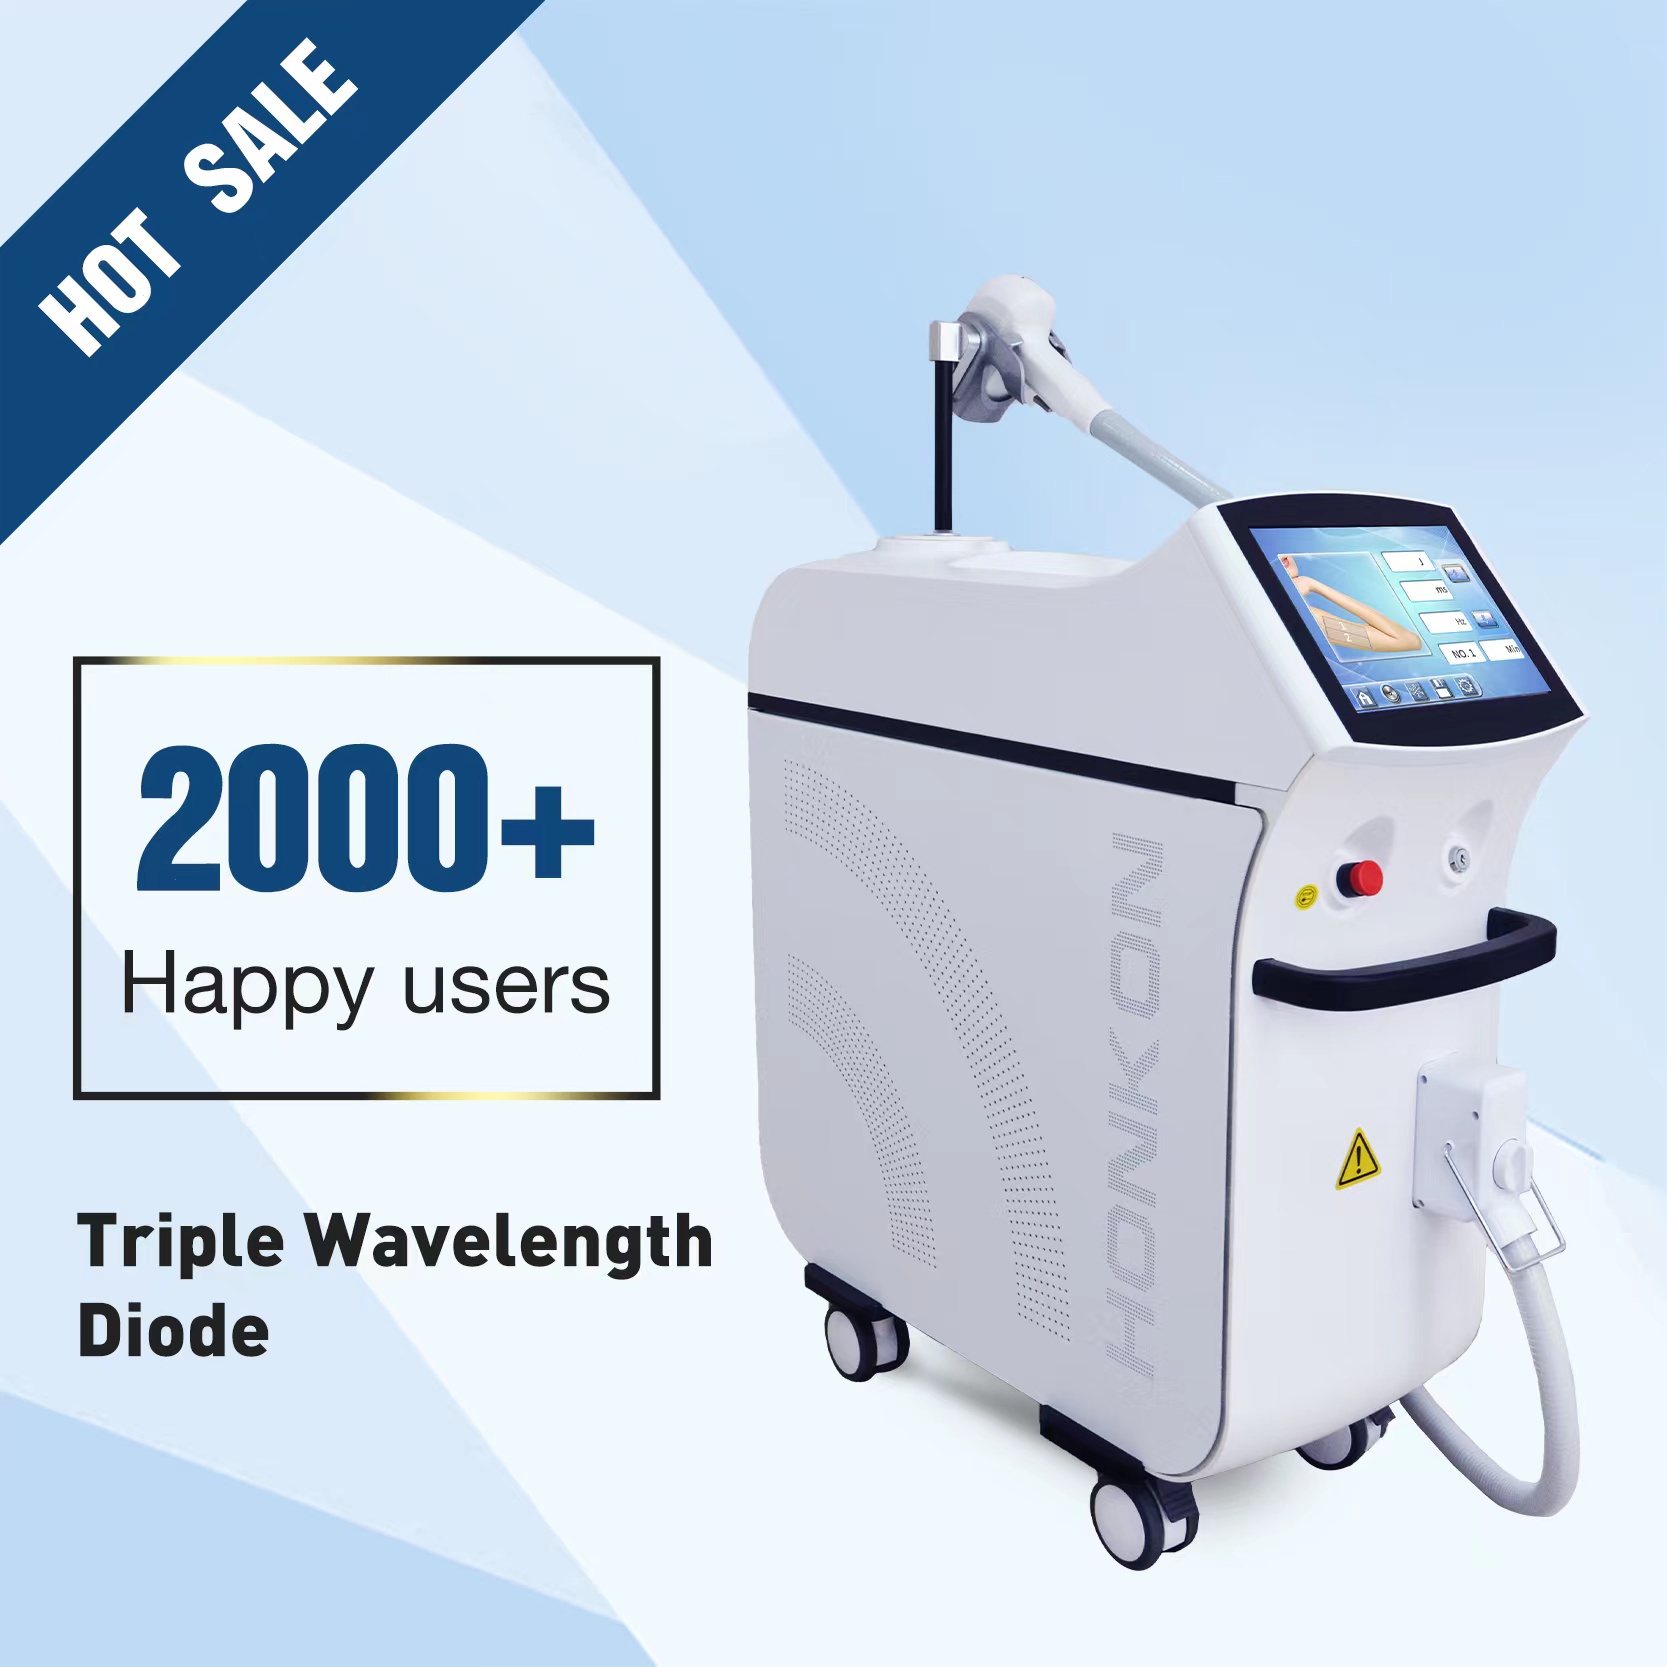 Premium 1200Watts Triple Wavelength Diode Laser, 1064nm, 808nm and 755nm Featured Image